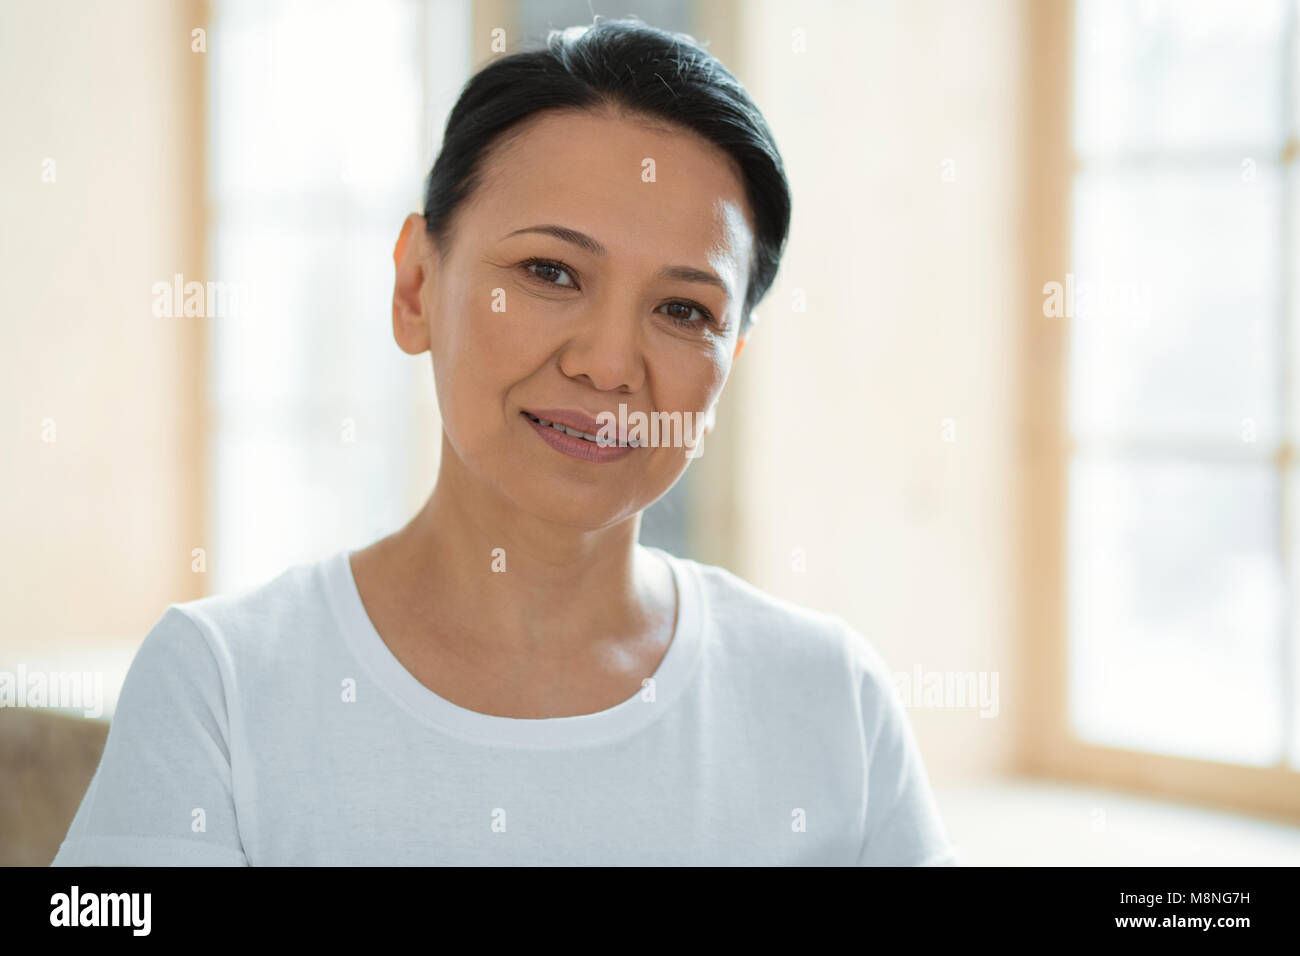 Beautiful pleased woman smiling sincerely Stock Photo